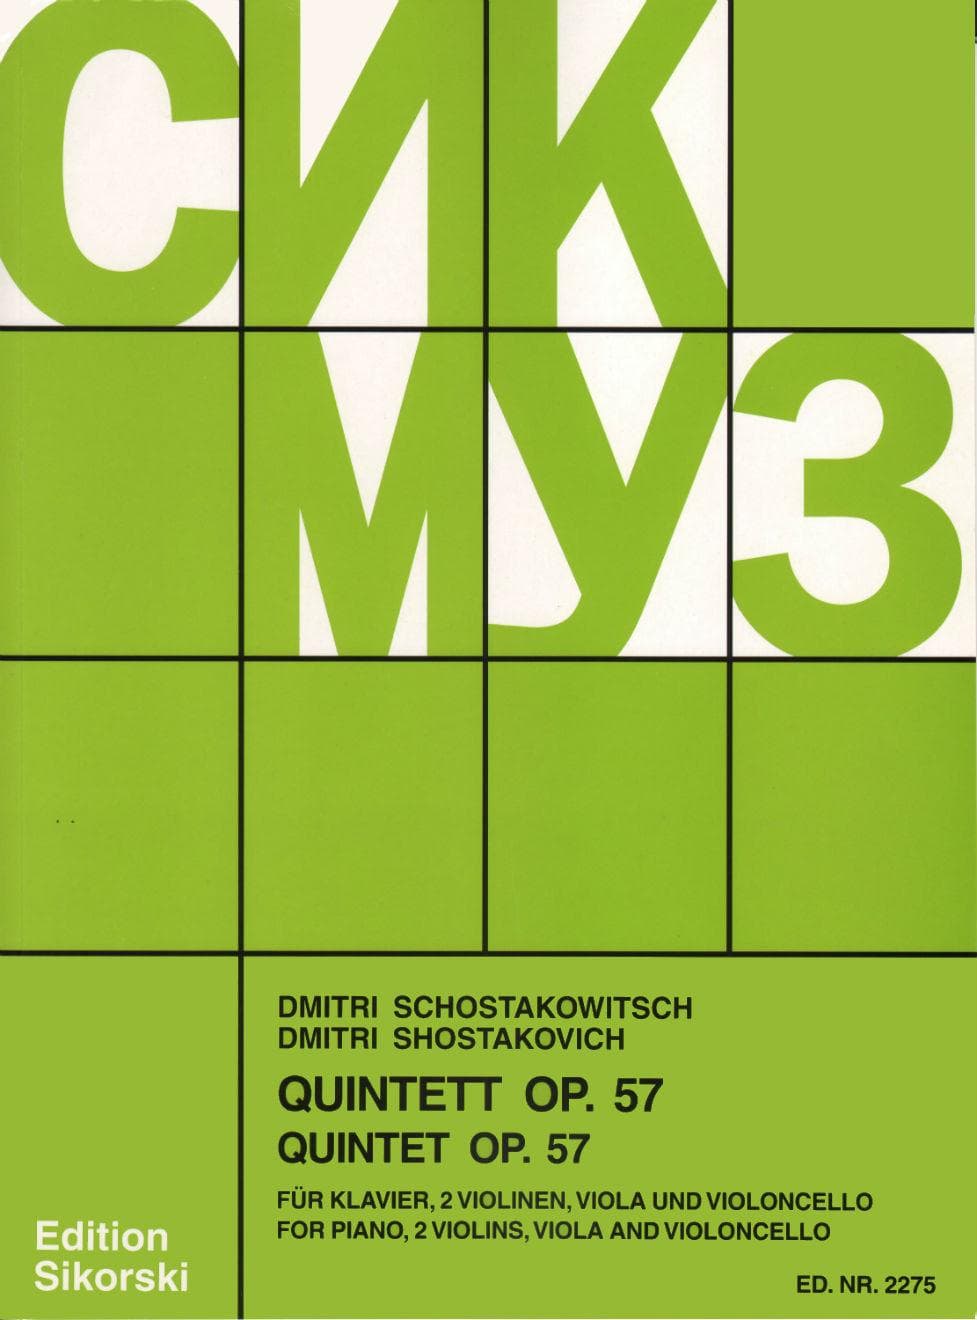 Shostakovich, Dmitri - Piano Quintet in g minor Op 57 Published by Sikorski